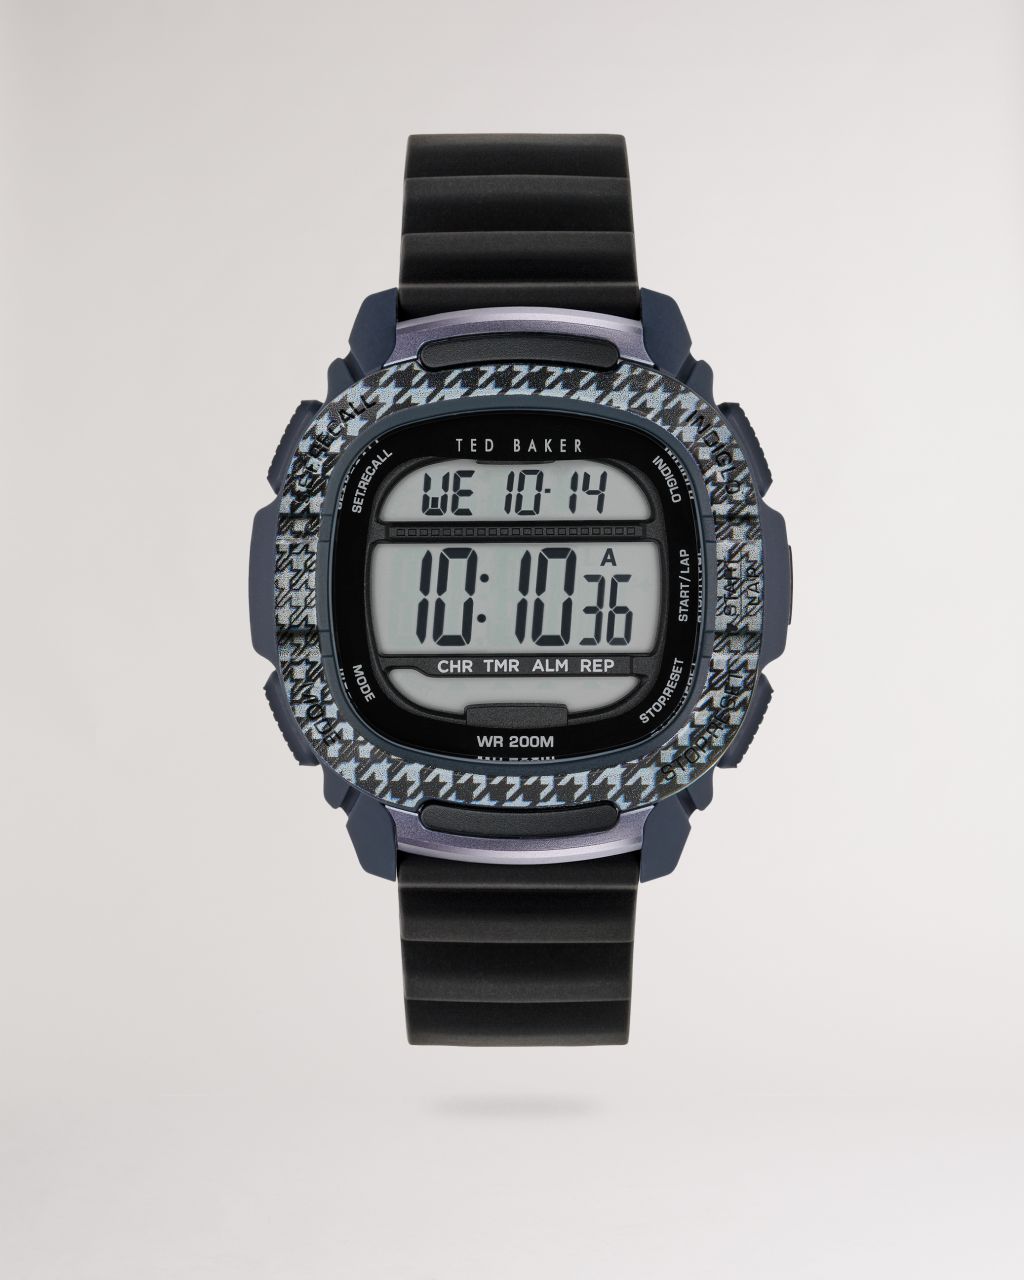 Ted Baker BKPALF202 Digital Silicone Strap Watch in Black GLAAS, Men's Accessories